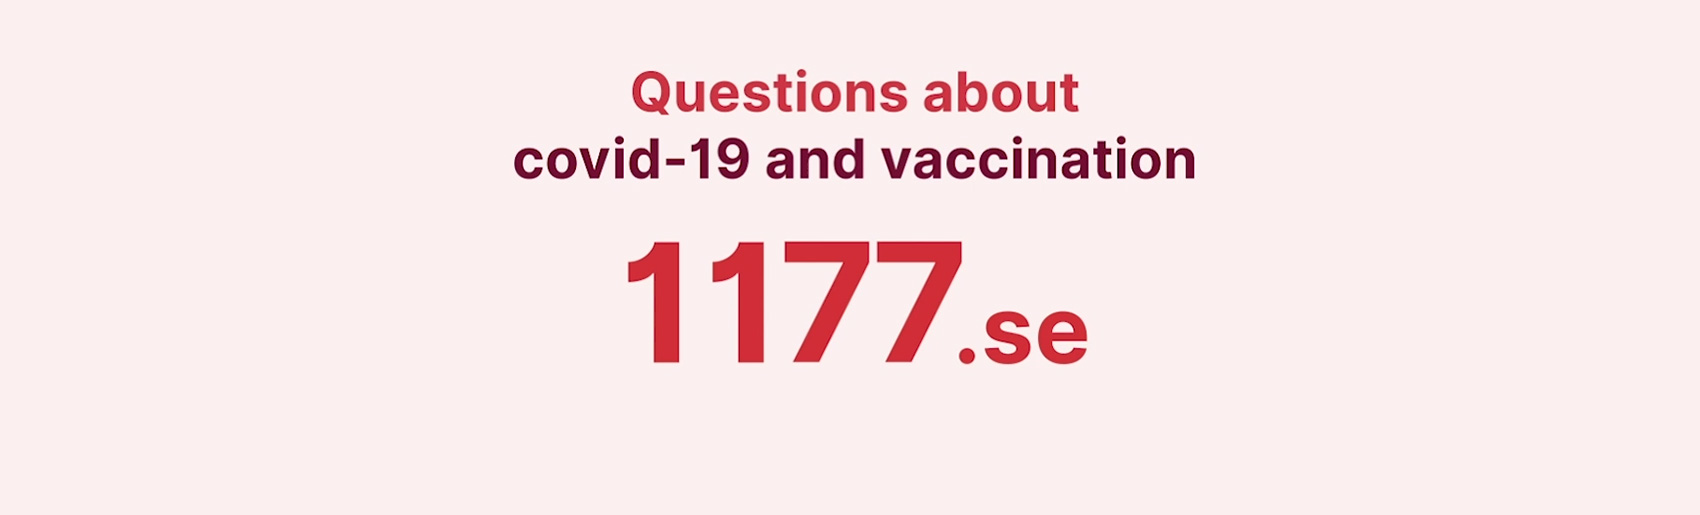 Text: Questions about covid-19 and vaccination - 1177.se